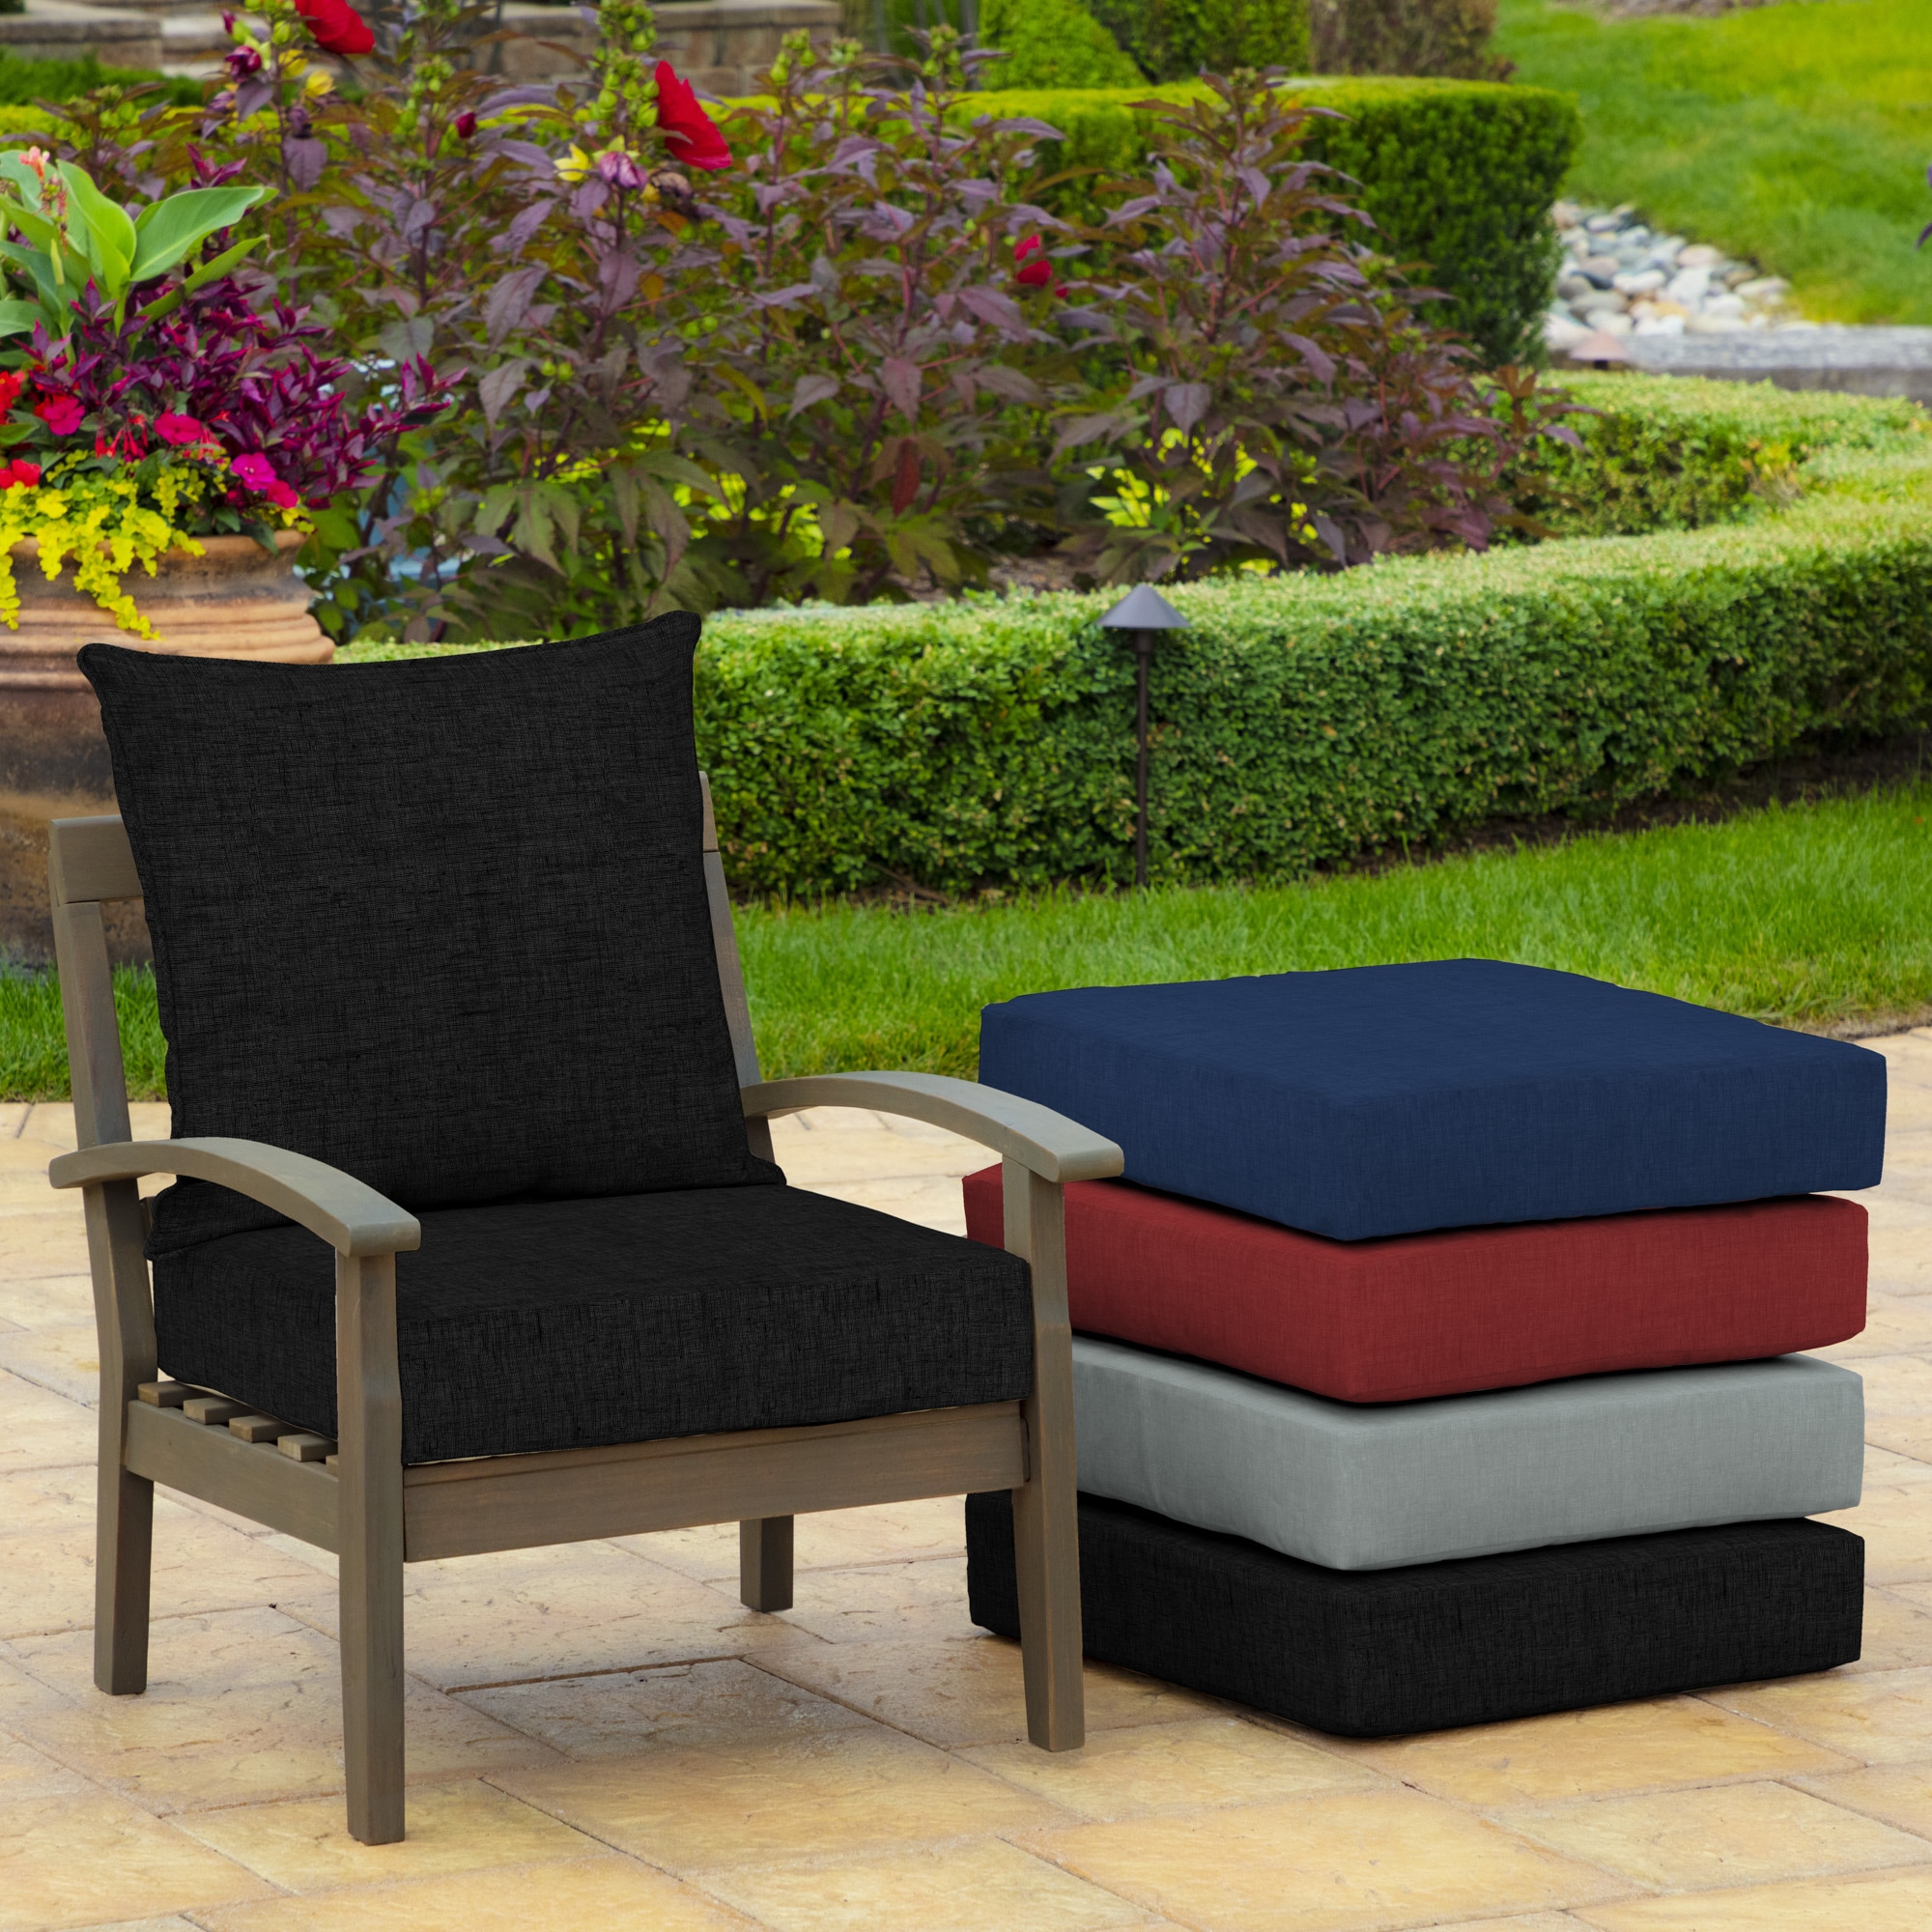 Arden Selections Oasis 15 in. x 17 in. Rectangle Outdoor Seat